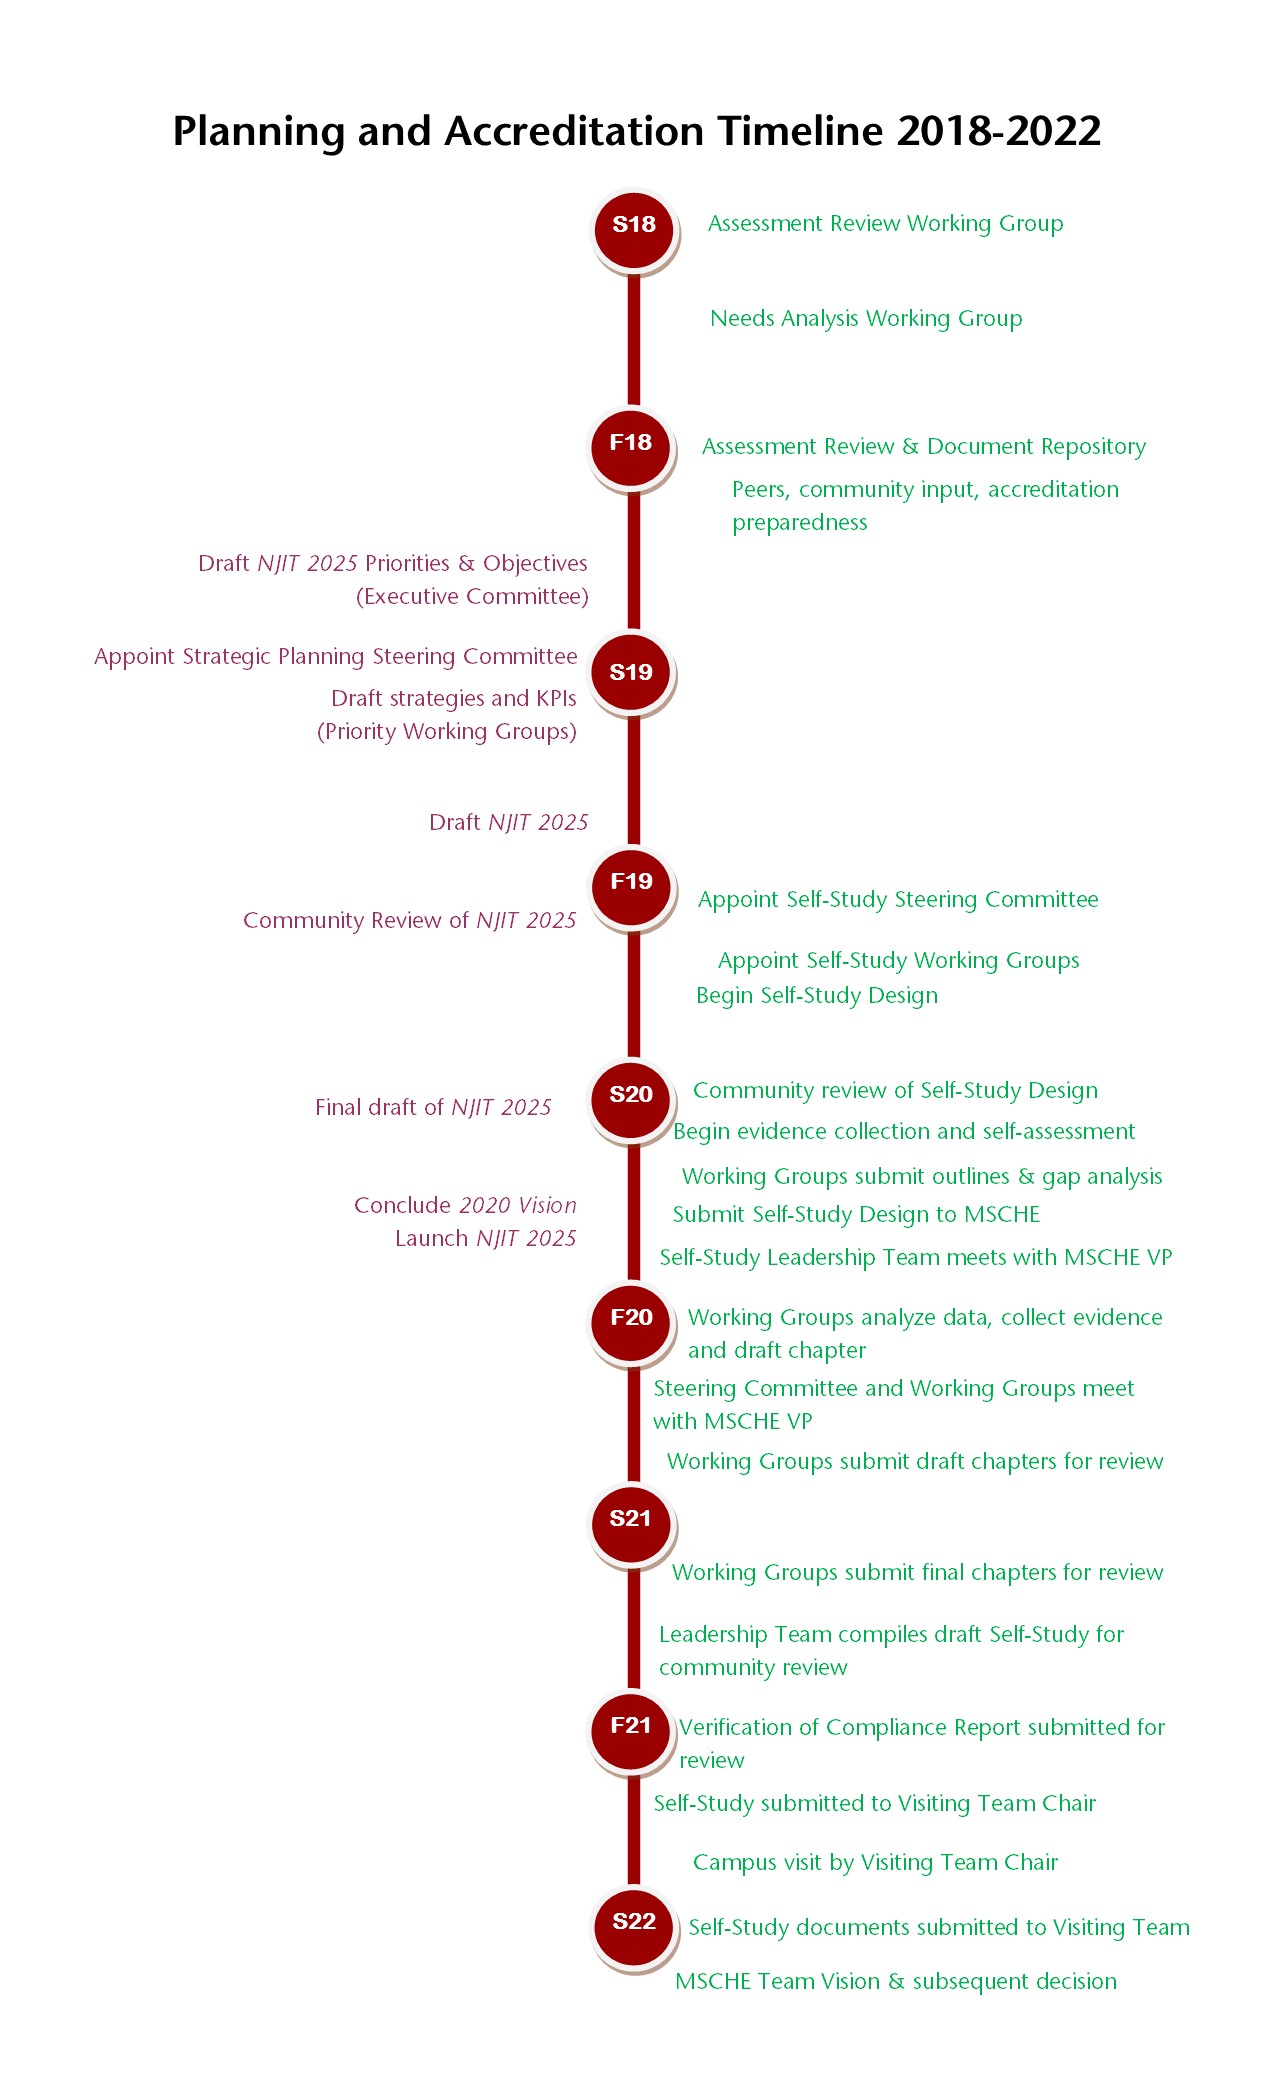 Timeline of NJIT's planning and Accreditation activities from 2018 through 2022